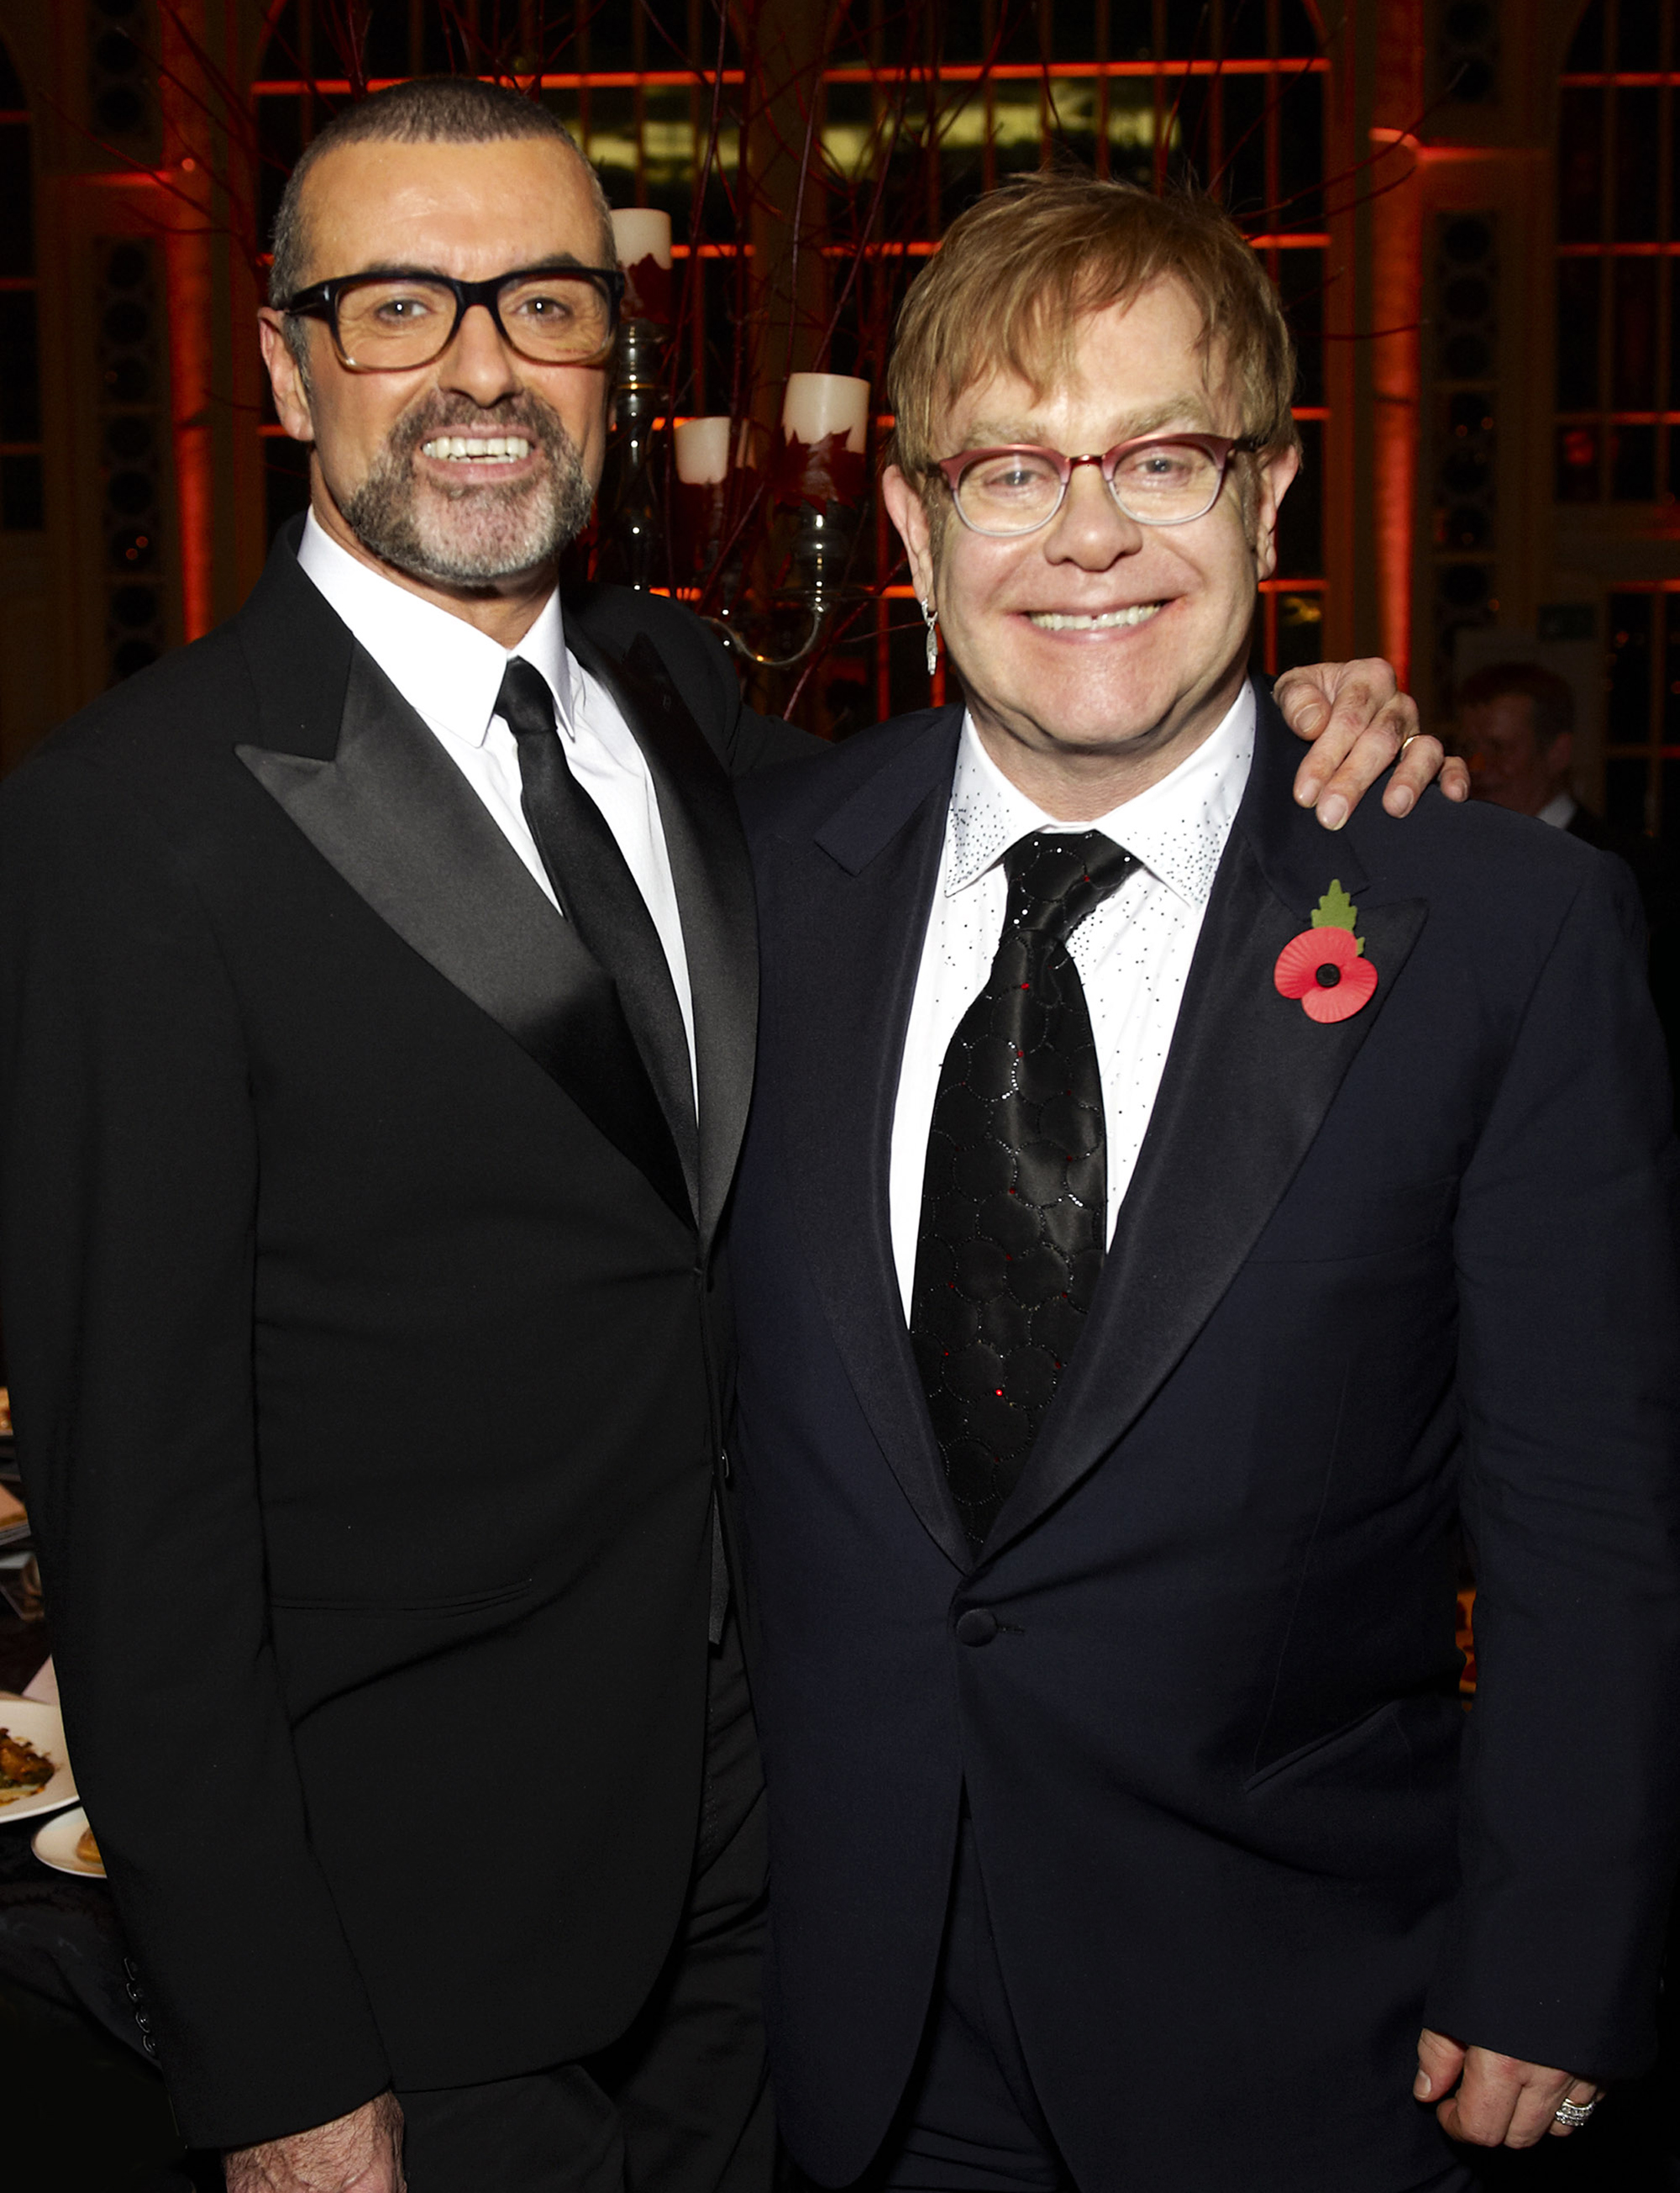 George Michael and Elton John attend a charity performance benefiting the Elton John AIDS Foundation in London, on Nov. 6, 2011.